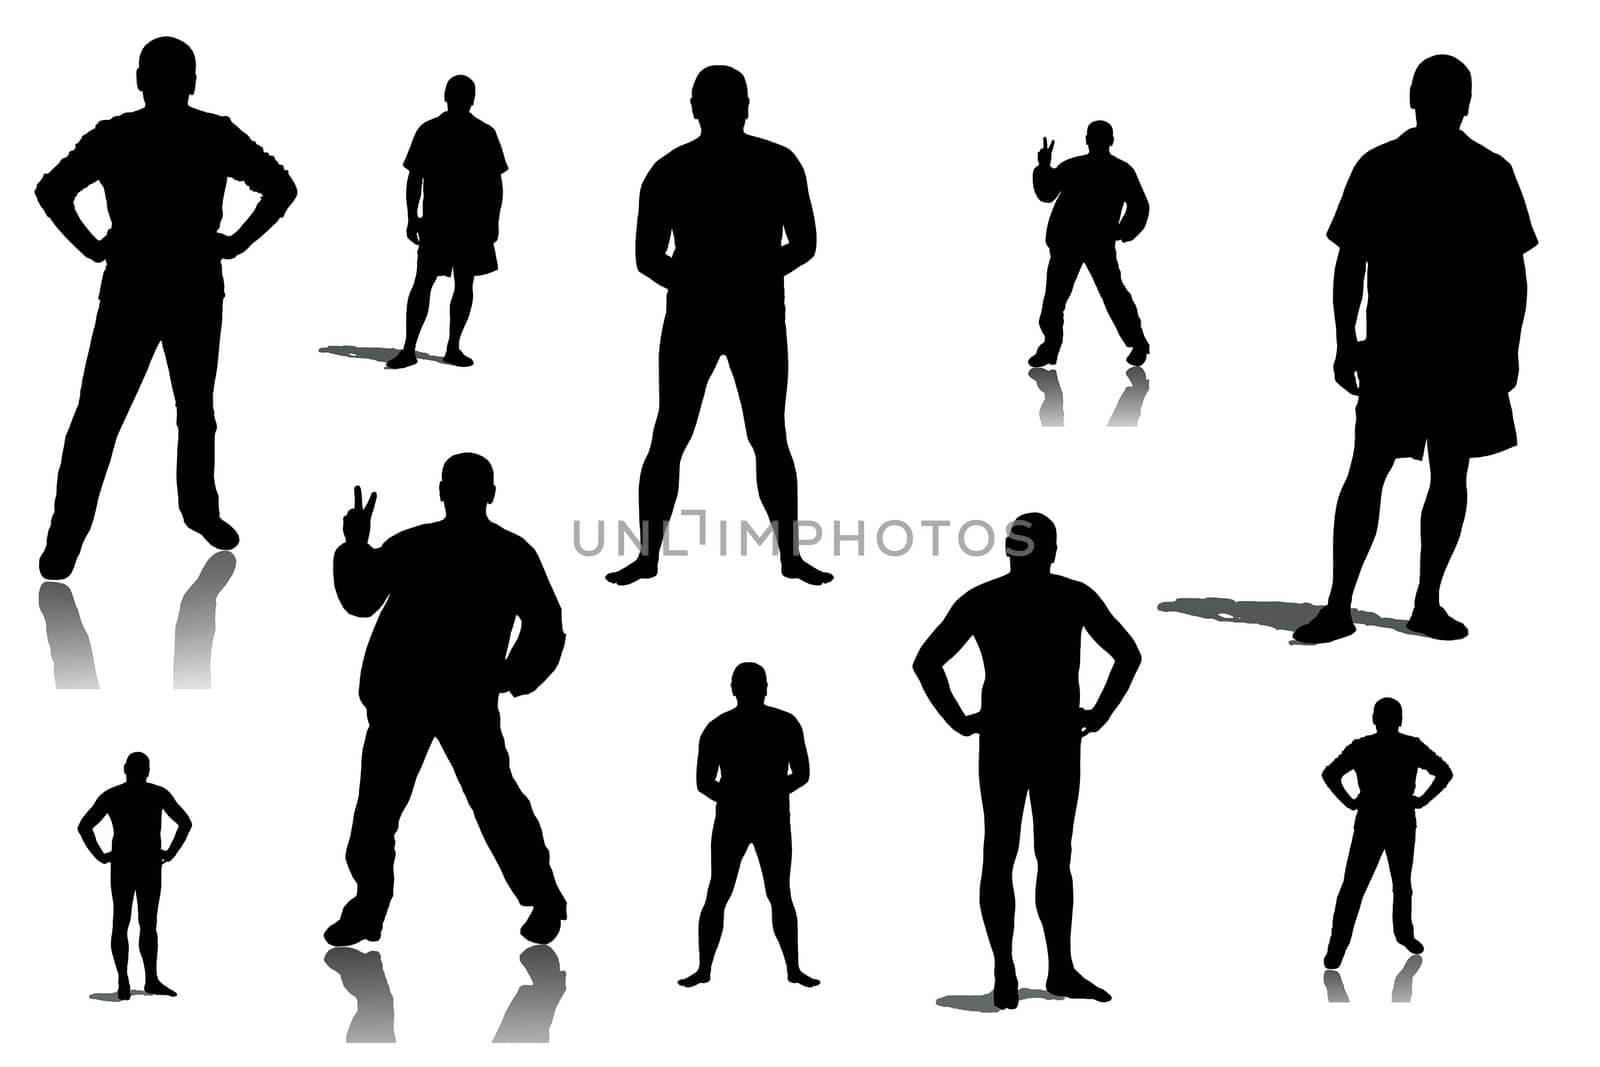 Collage of silhouettes of men in various poses, isolated on white background.